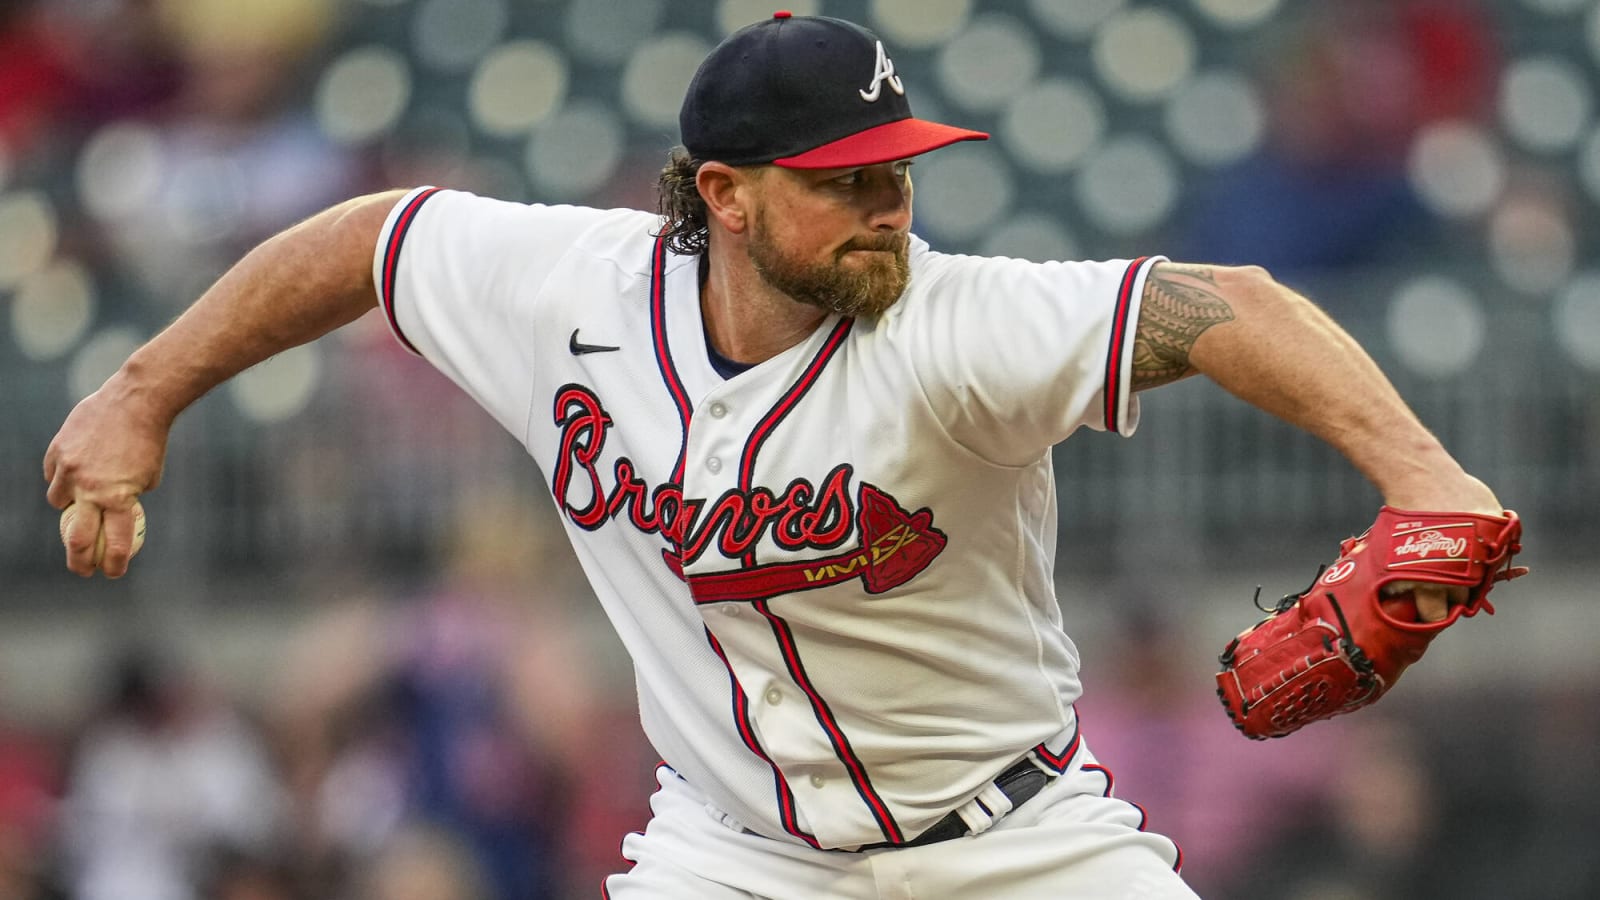  Kirby Yates thinks he can still turn back the clock